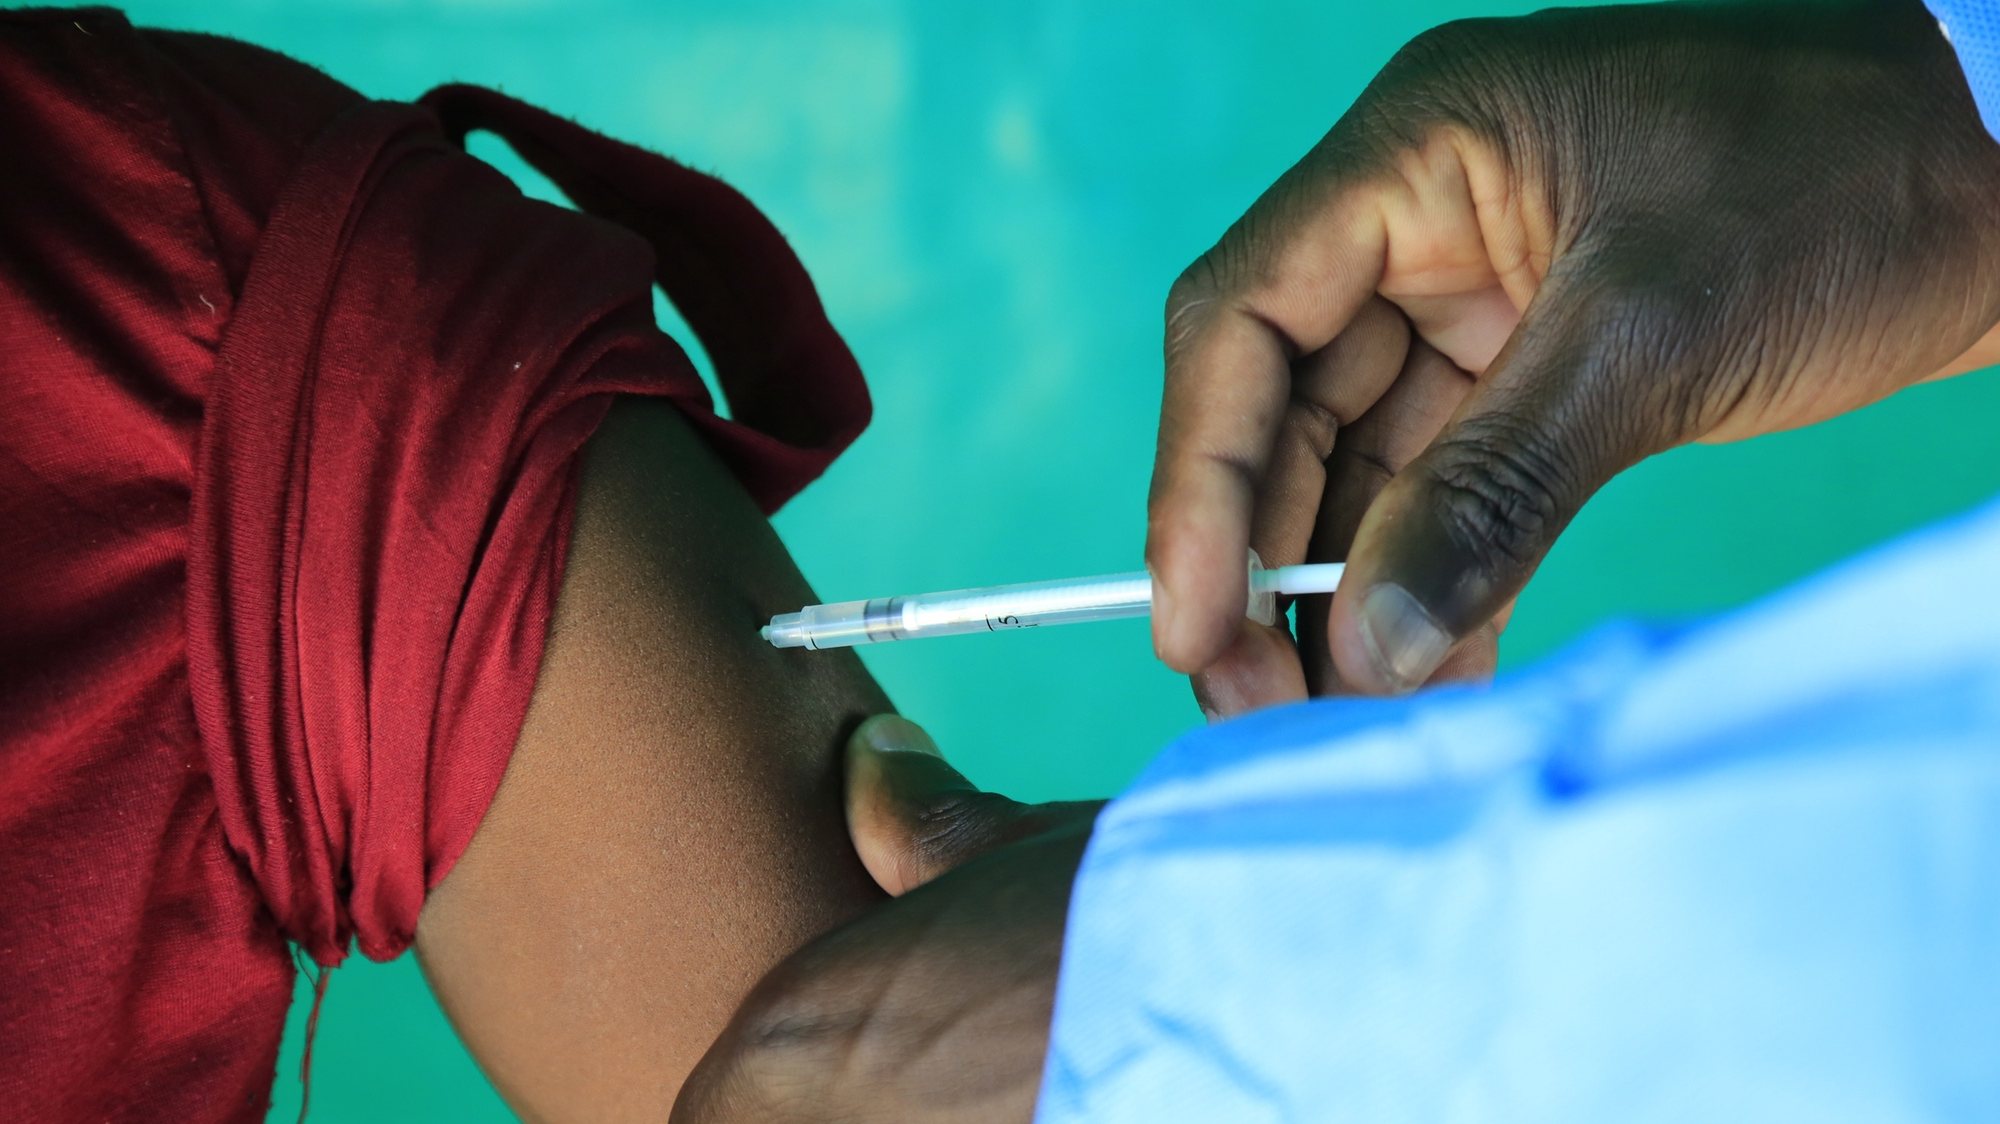 epa09401338 A person receives a covid-19 vaccine at Chitungwiza General Hospital, Chitungwiza, Zimbabwe, 06 August 2021. The vaccination campaign is continuing as the Covid-19 cases are rising.  EPA/AARON UFUMELI